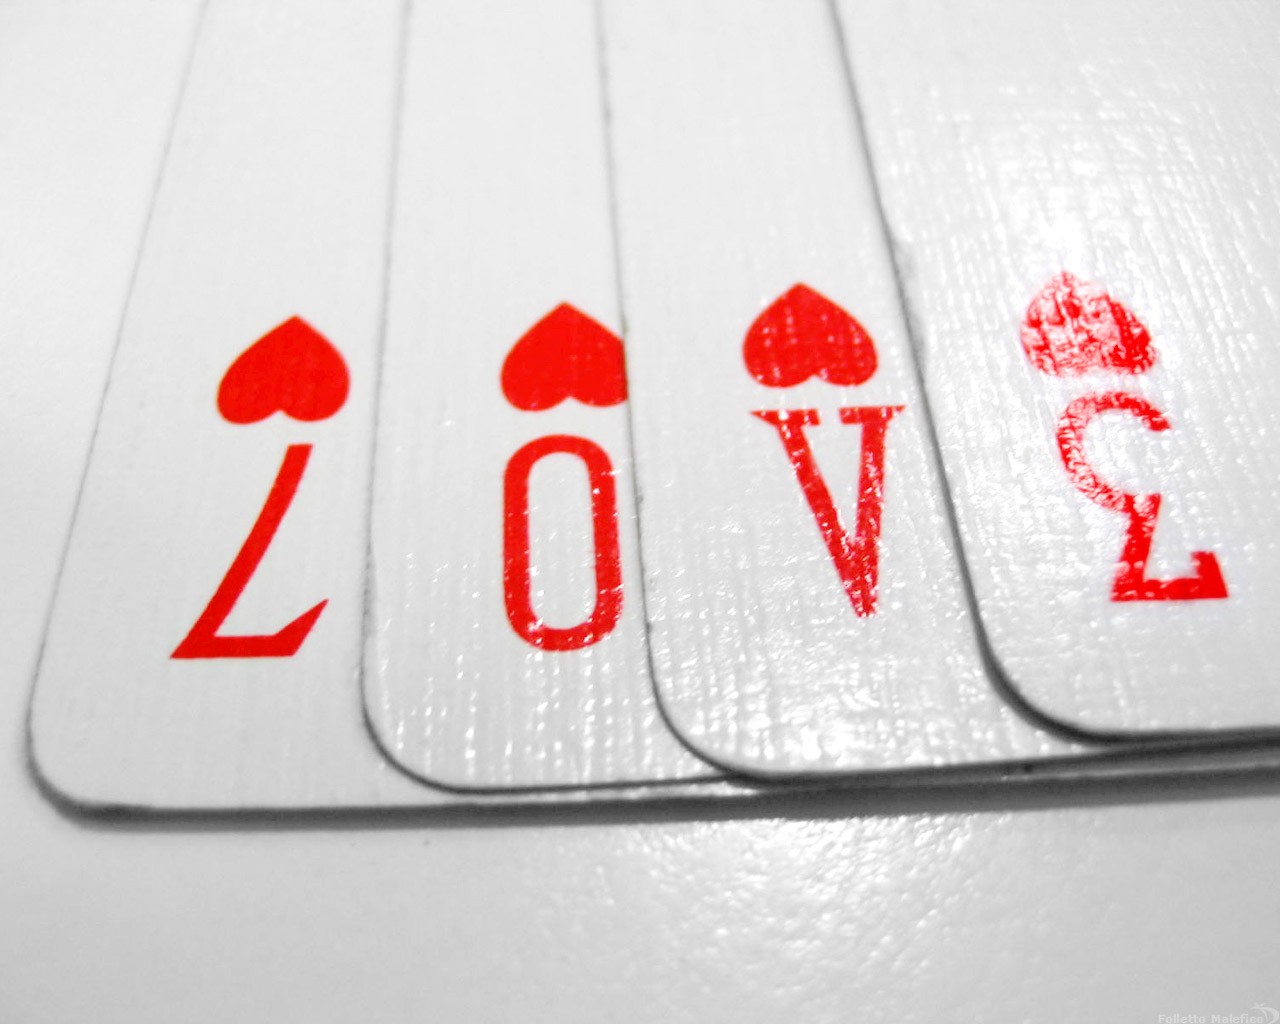 General 1280x1024 cards playing cards numbers heart (design)